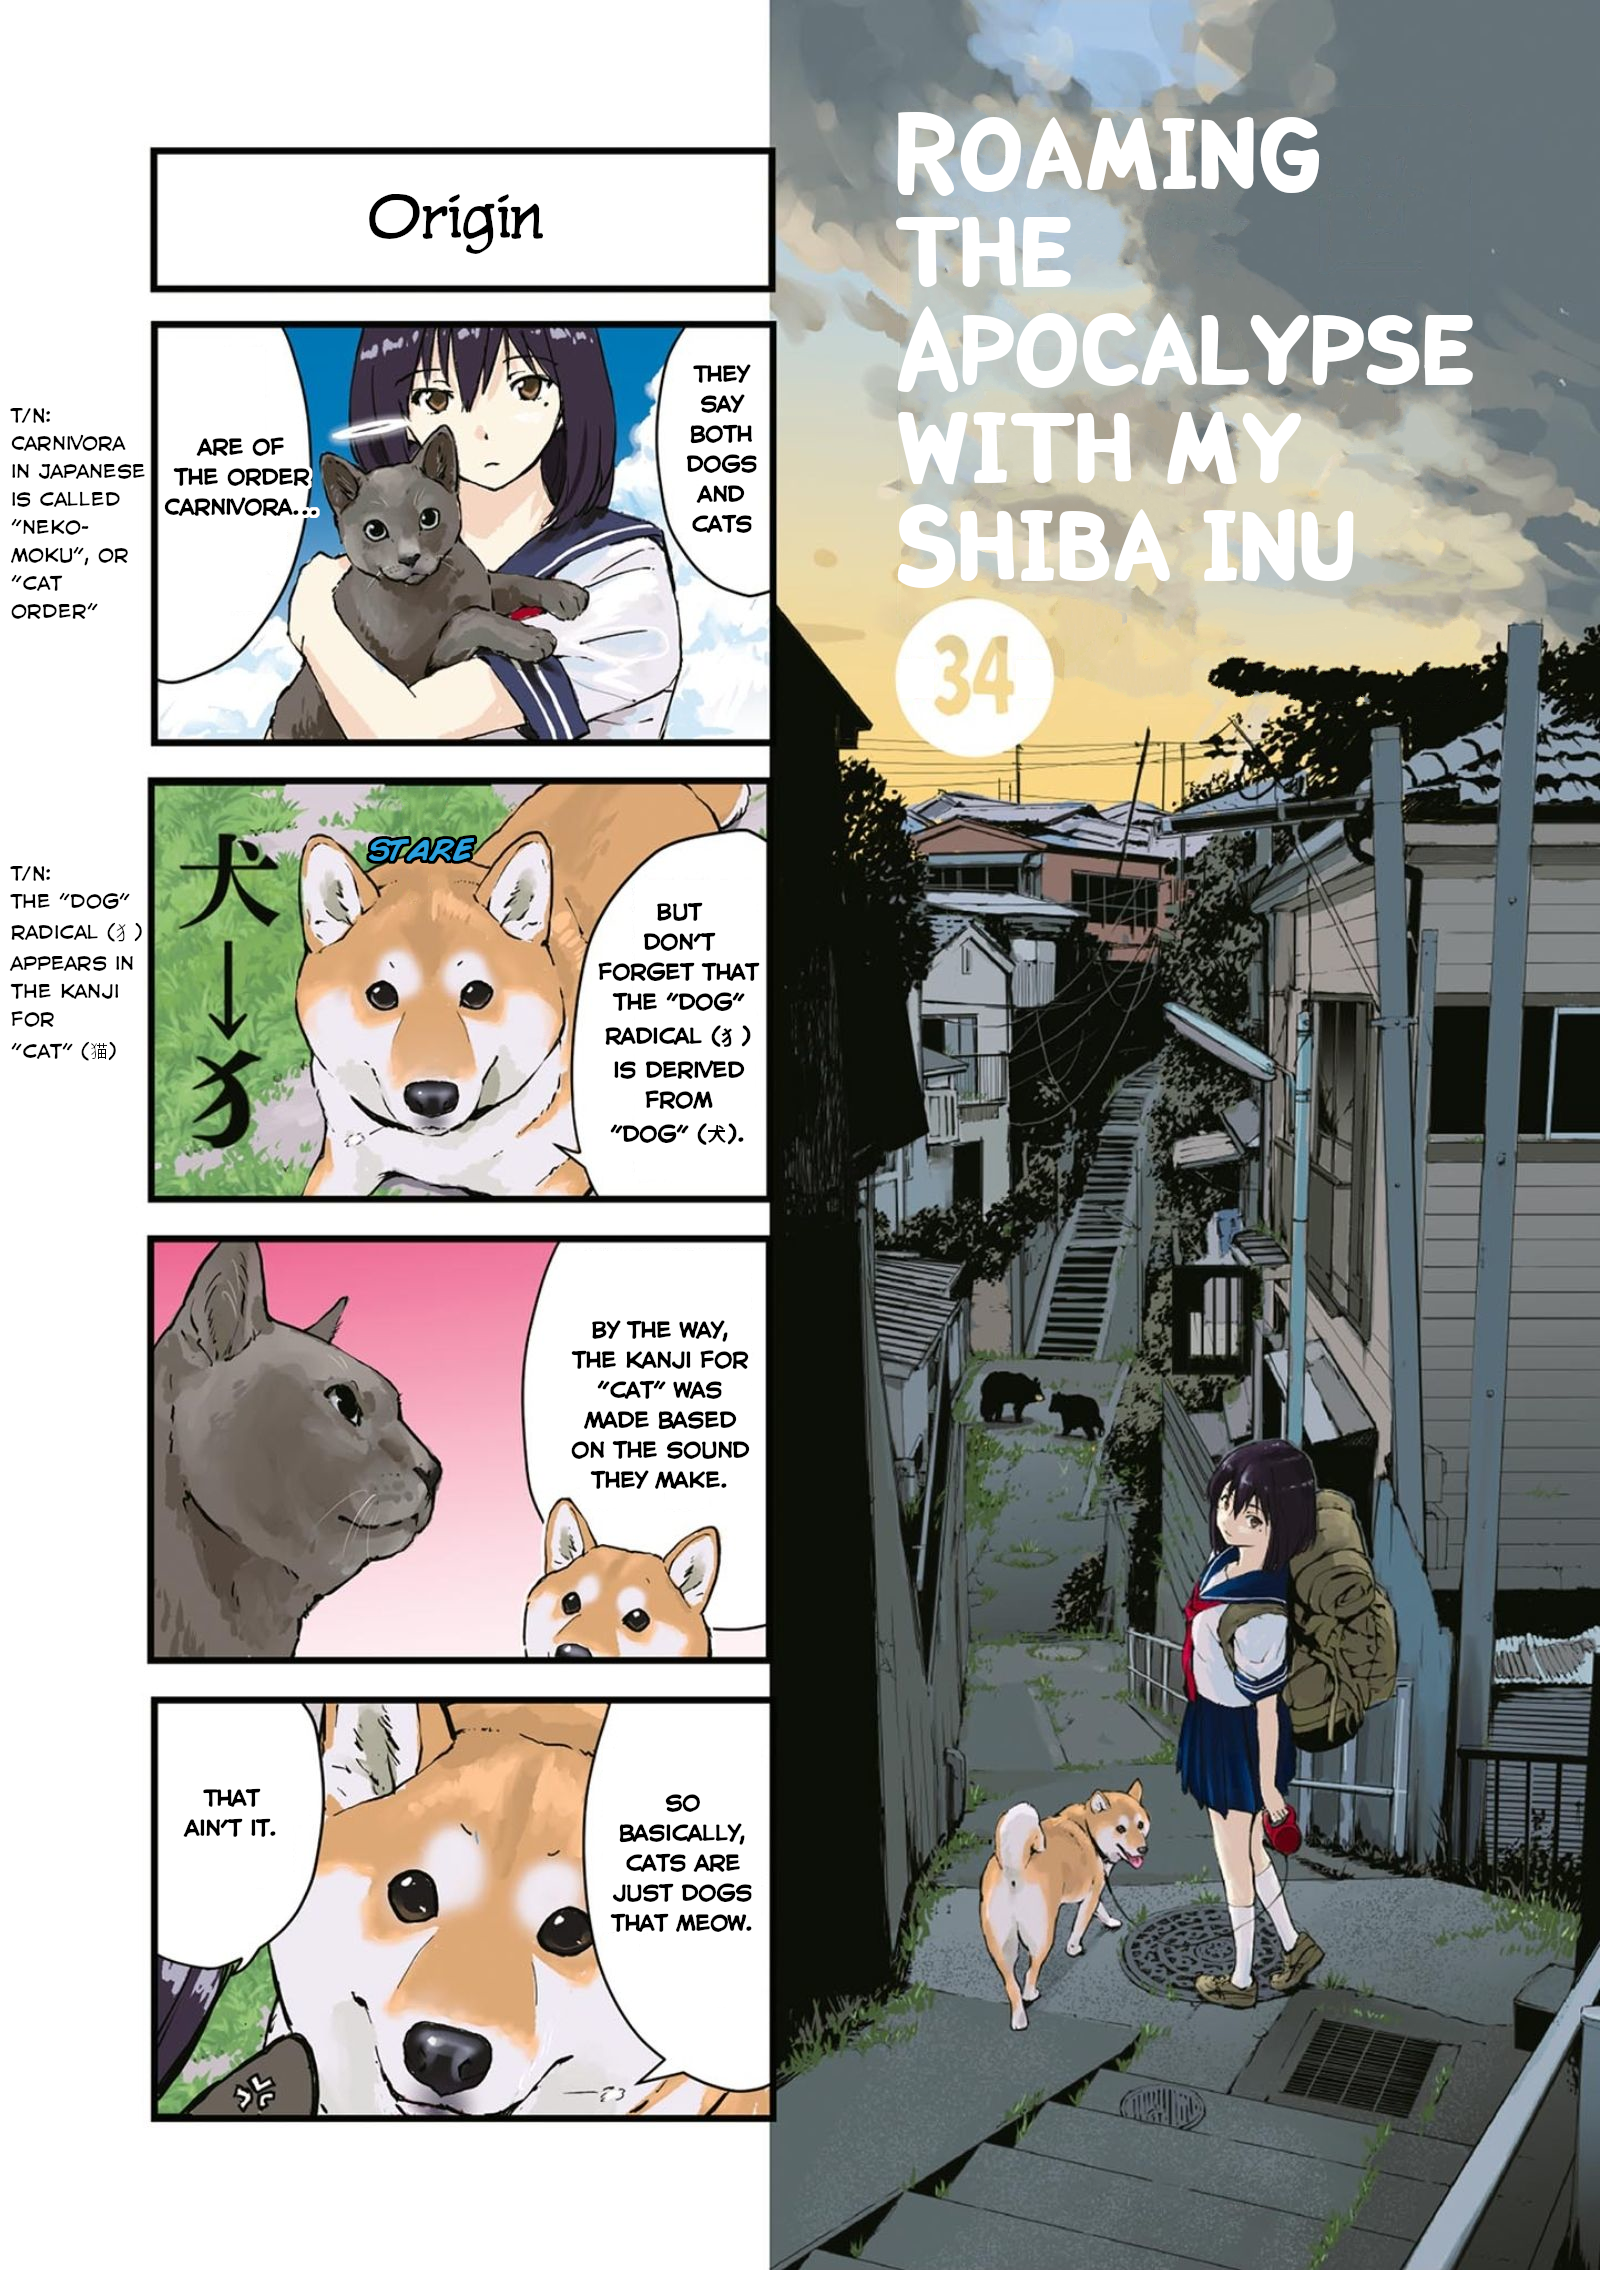 Roaming The Apocalypse With My Shiba Inu - chapter 34 - #1